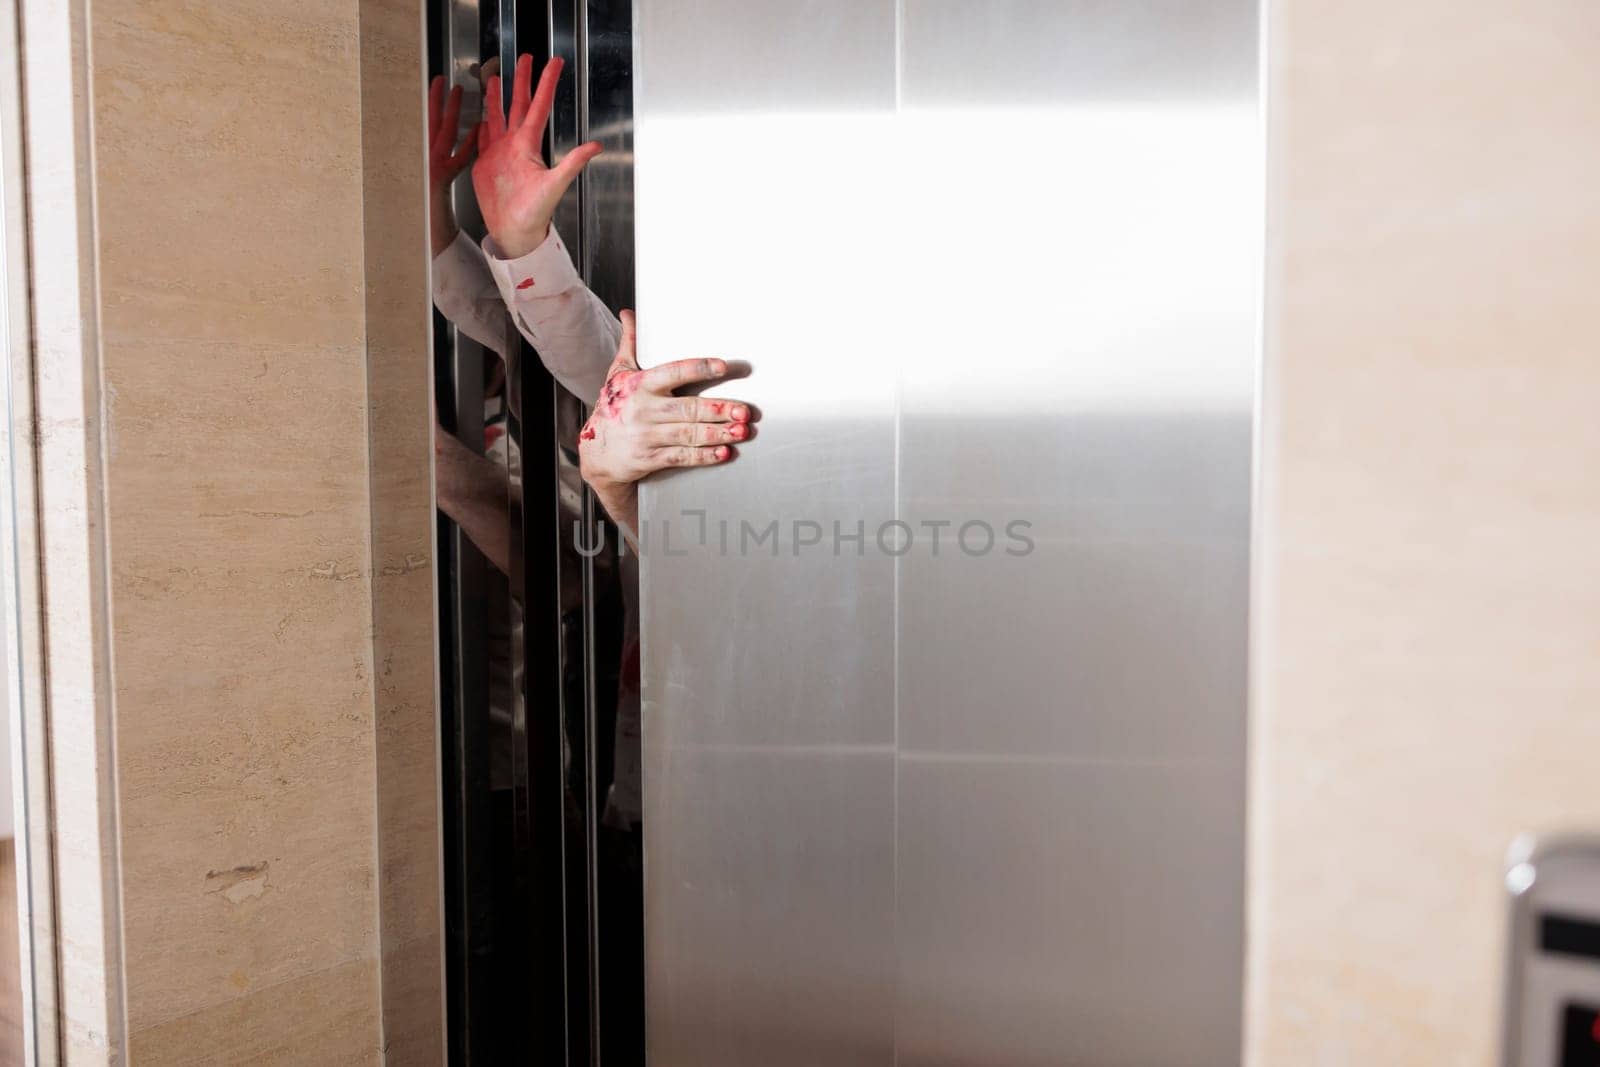 Demonic zombies hands opening office elevator, coming out to infect more people and eat brains during apocalypse. Terrifying bloody cadavers escaping escalator during doomsday